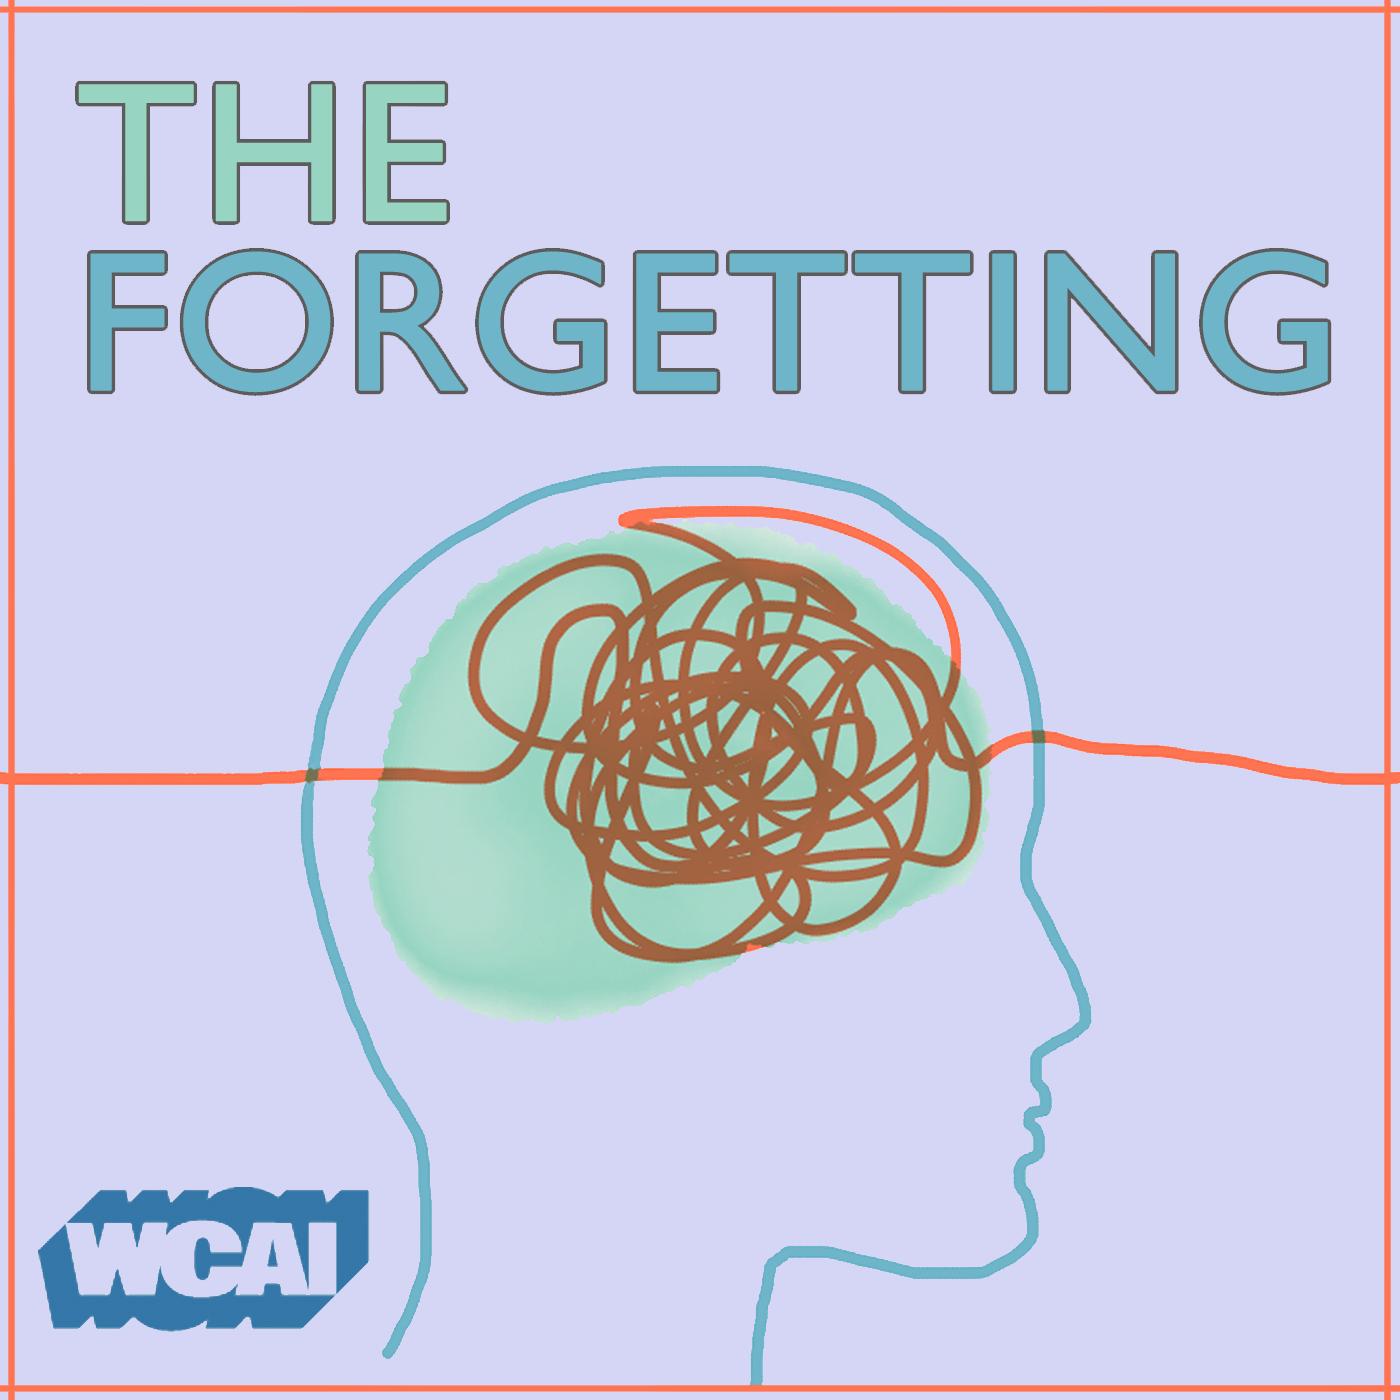 Thumbnail for "The Forgetting Special Edition: Dementia in the Age of Coronavirus".